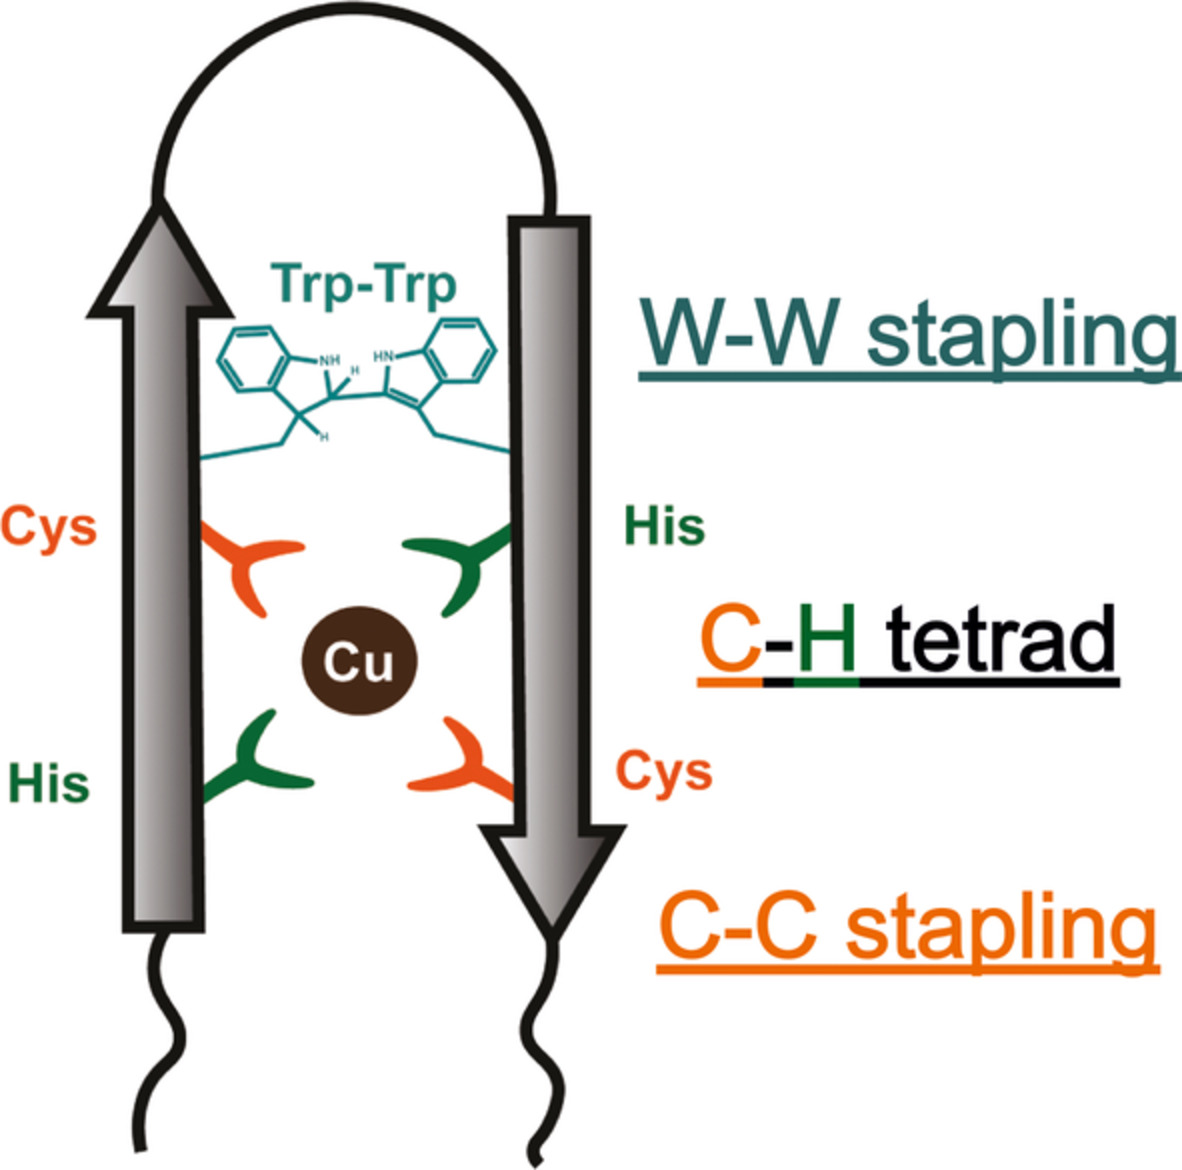 Wiley Chemistry Read Now In Peptidescience De Novo Design Of Metal Binding Cleft In A Trp Trp Stapled Thermostable B Hairpin Peptide T Co Cgt47q7cyl By Mahas999 Team Iiserbhopal Ampepsoc T Co Hem8npvdzx